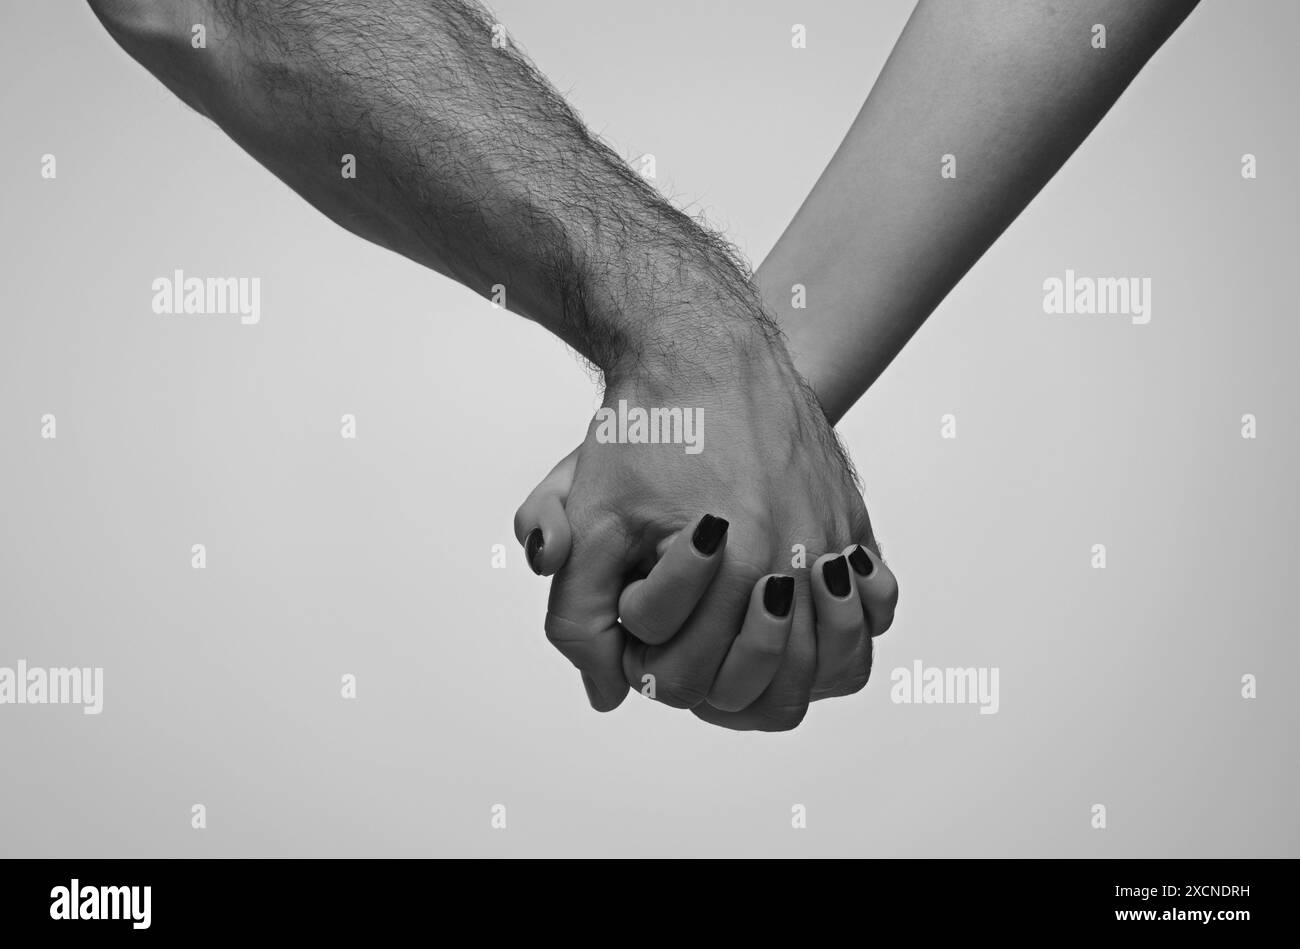 Helping hand. Holding hand, close up. Giving a helping hand. Rescue, helping gesture or hands. Salvation relations. Hand reaching out to help Stock Photo